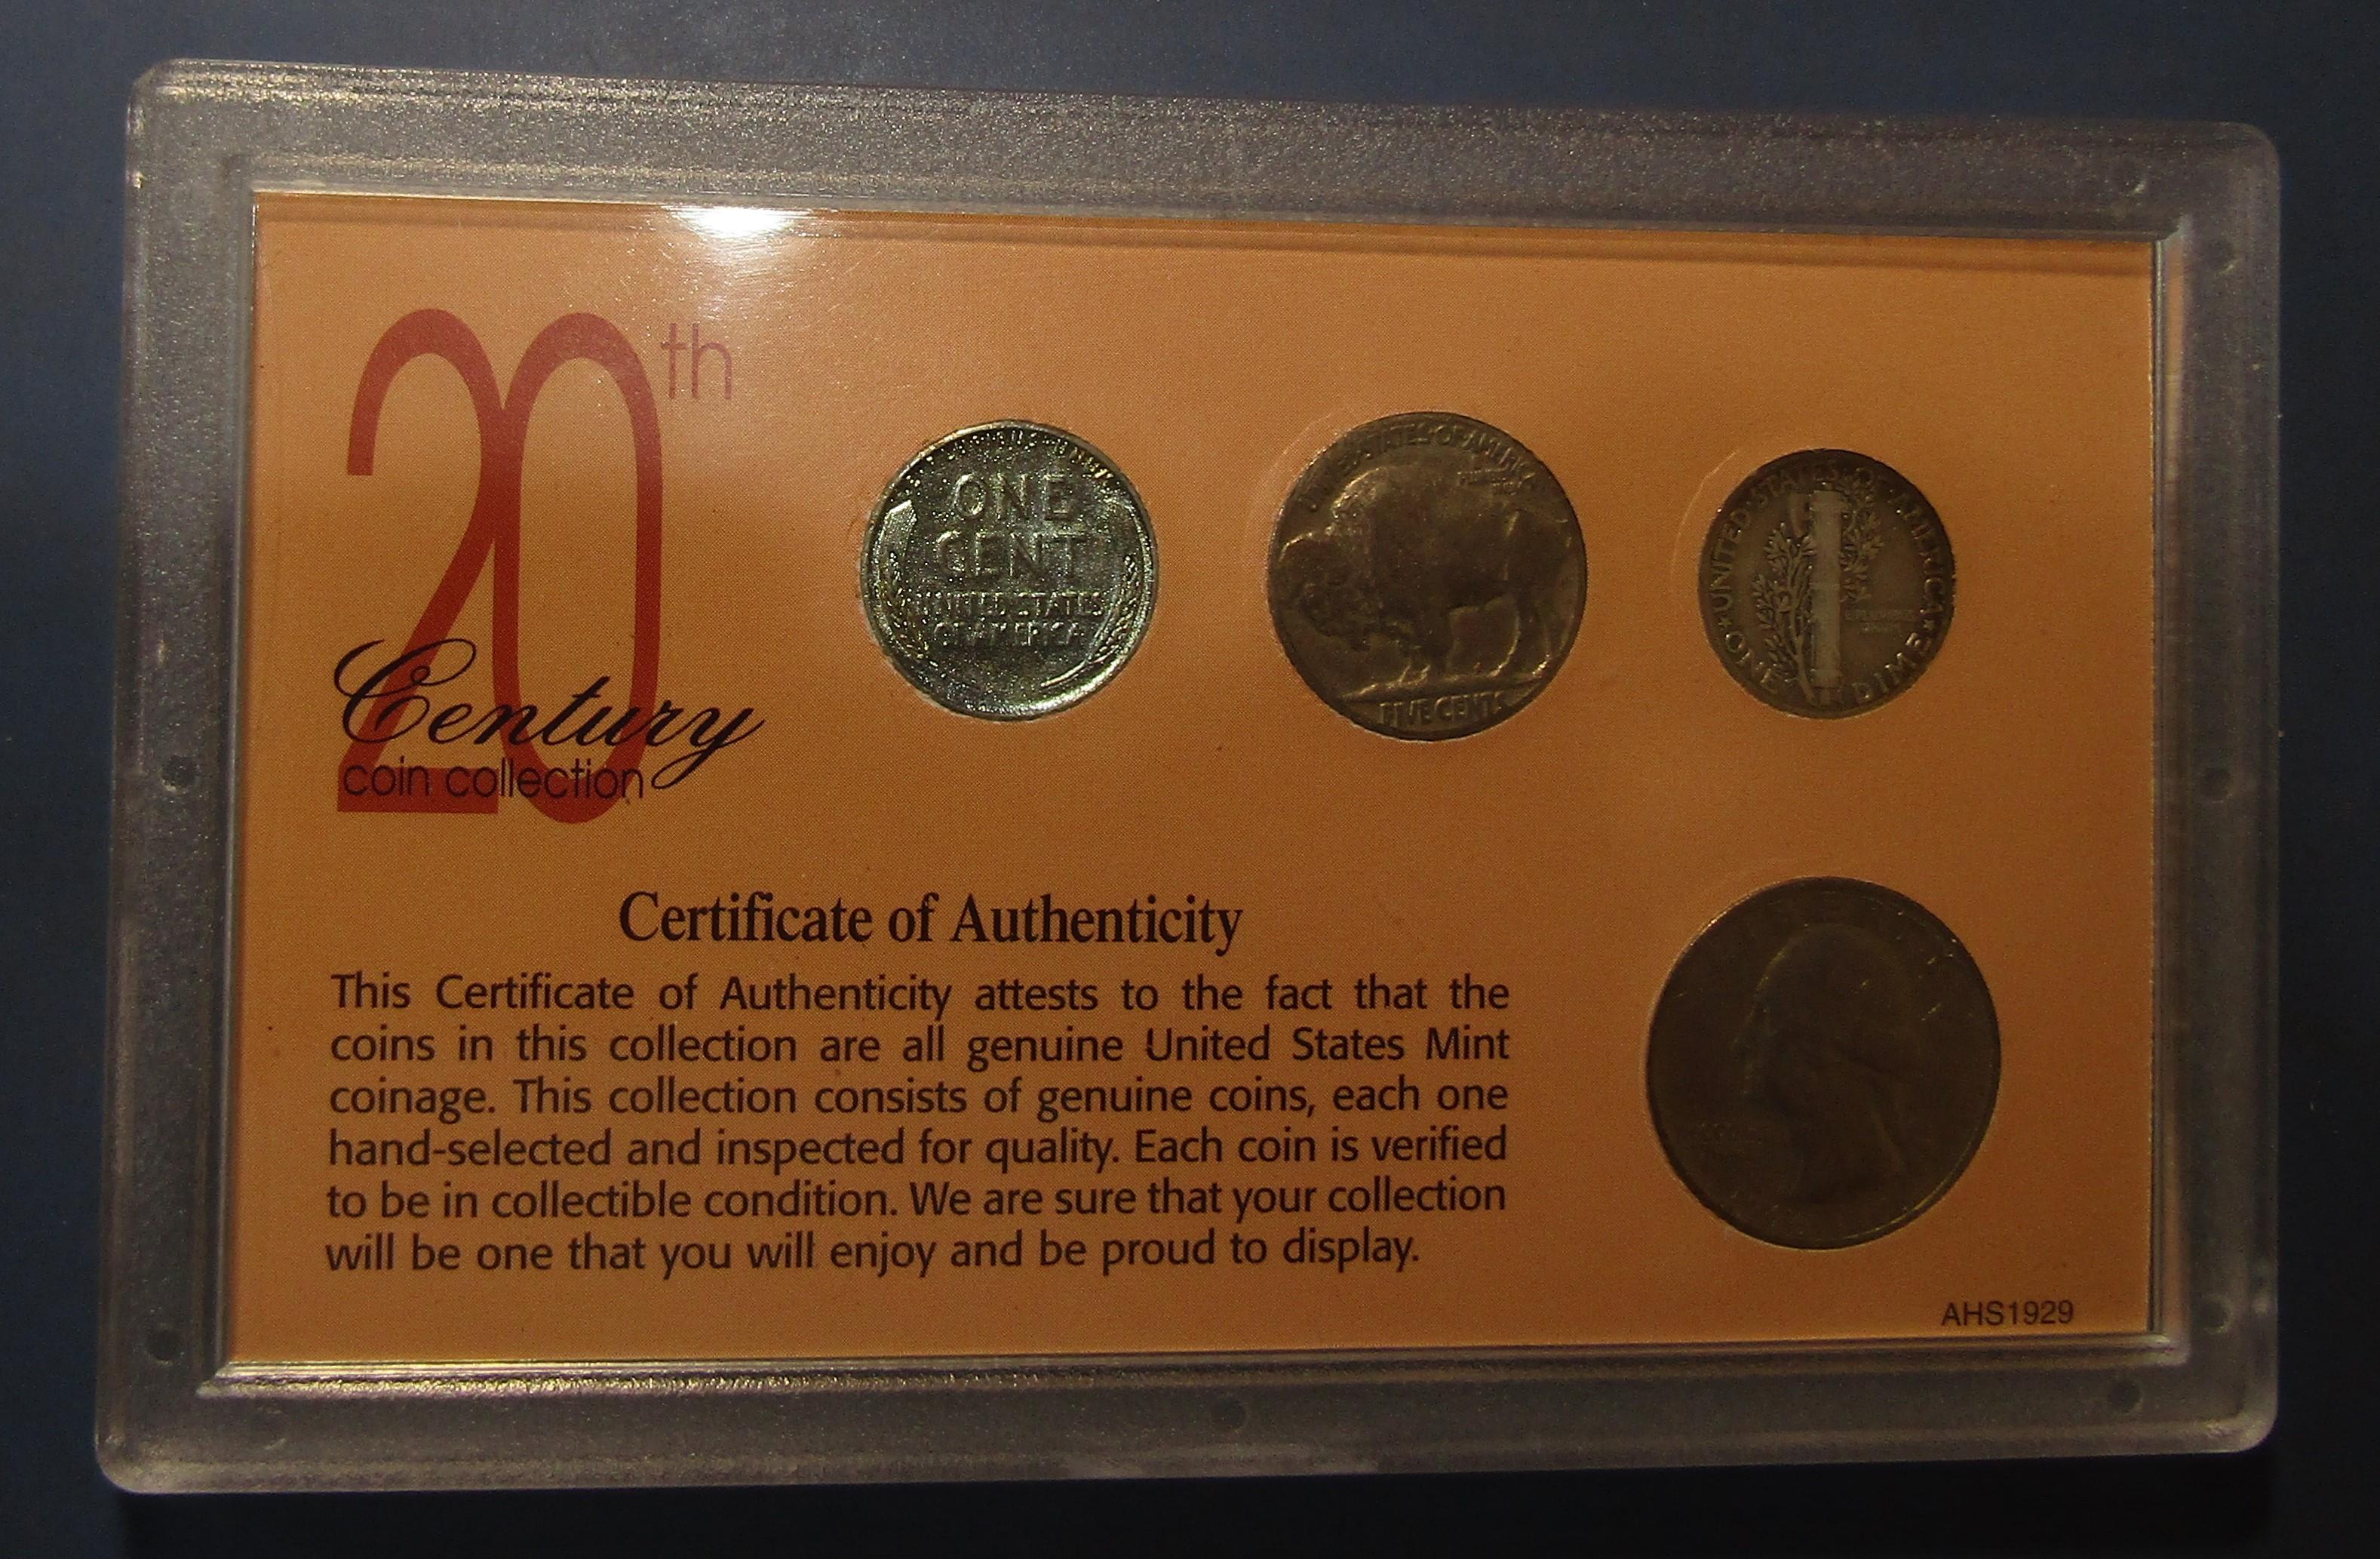 20TH CENTURY COIN COLLECTION